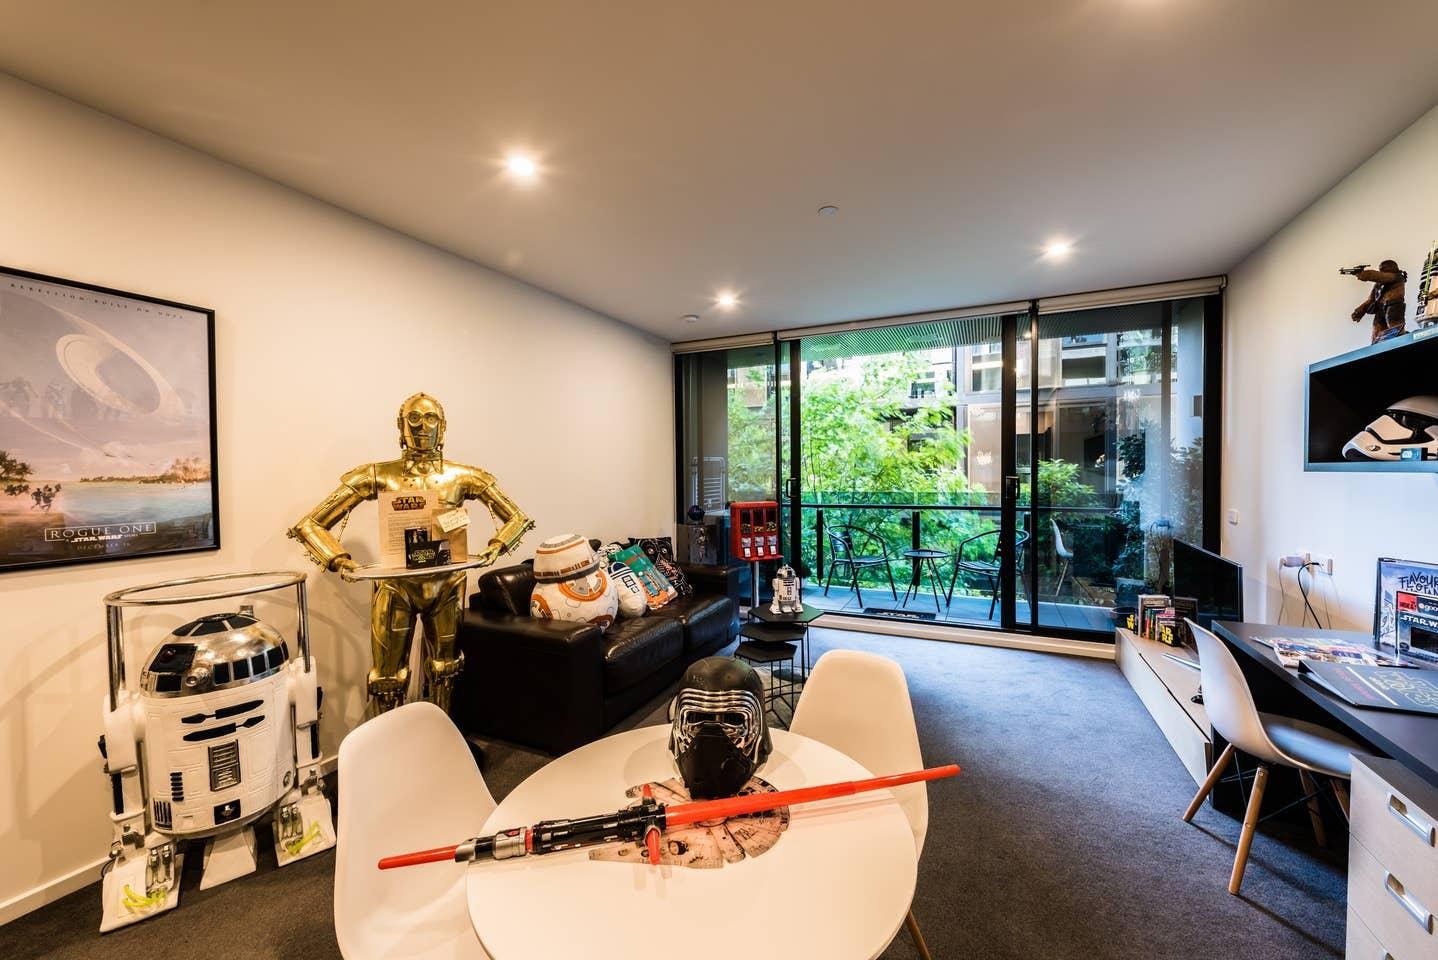 A picture of the living room in the Melbourne house featuring tons of Star Wars memorabilia